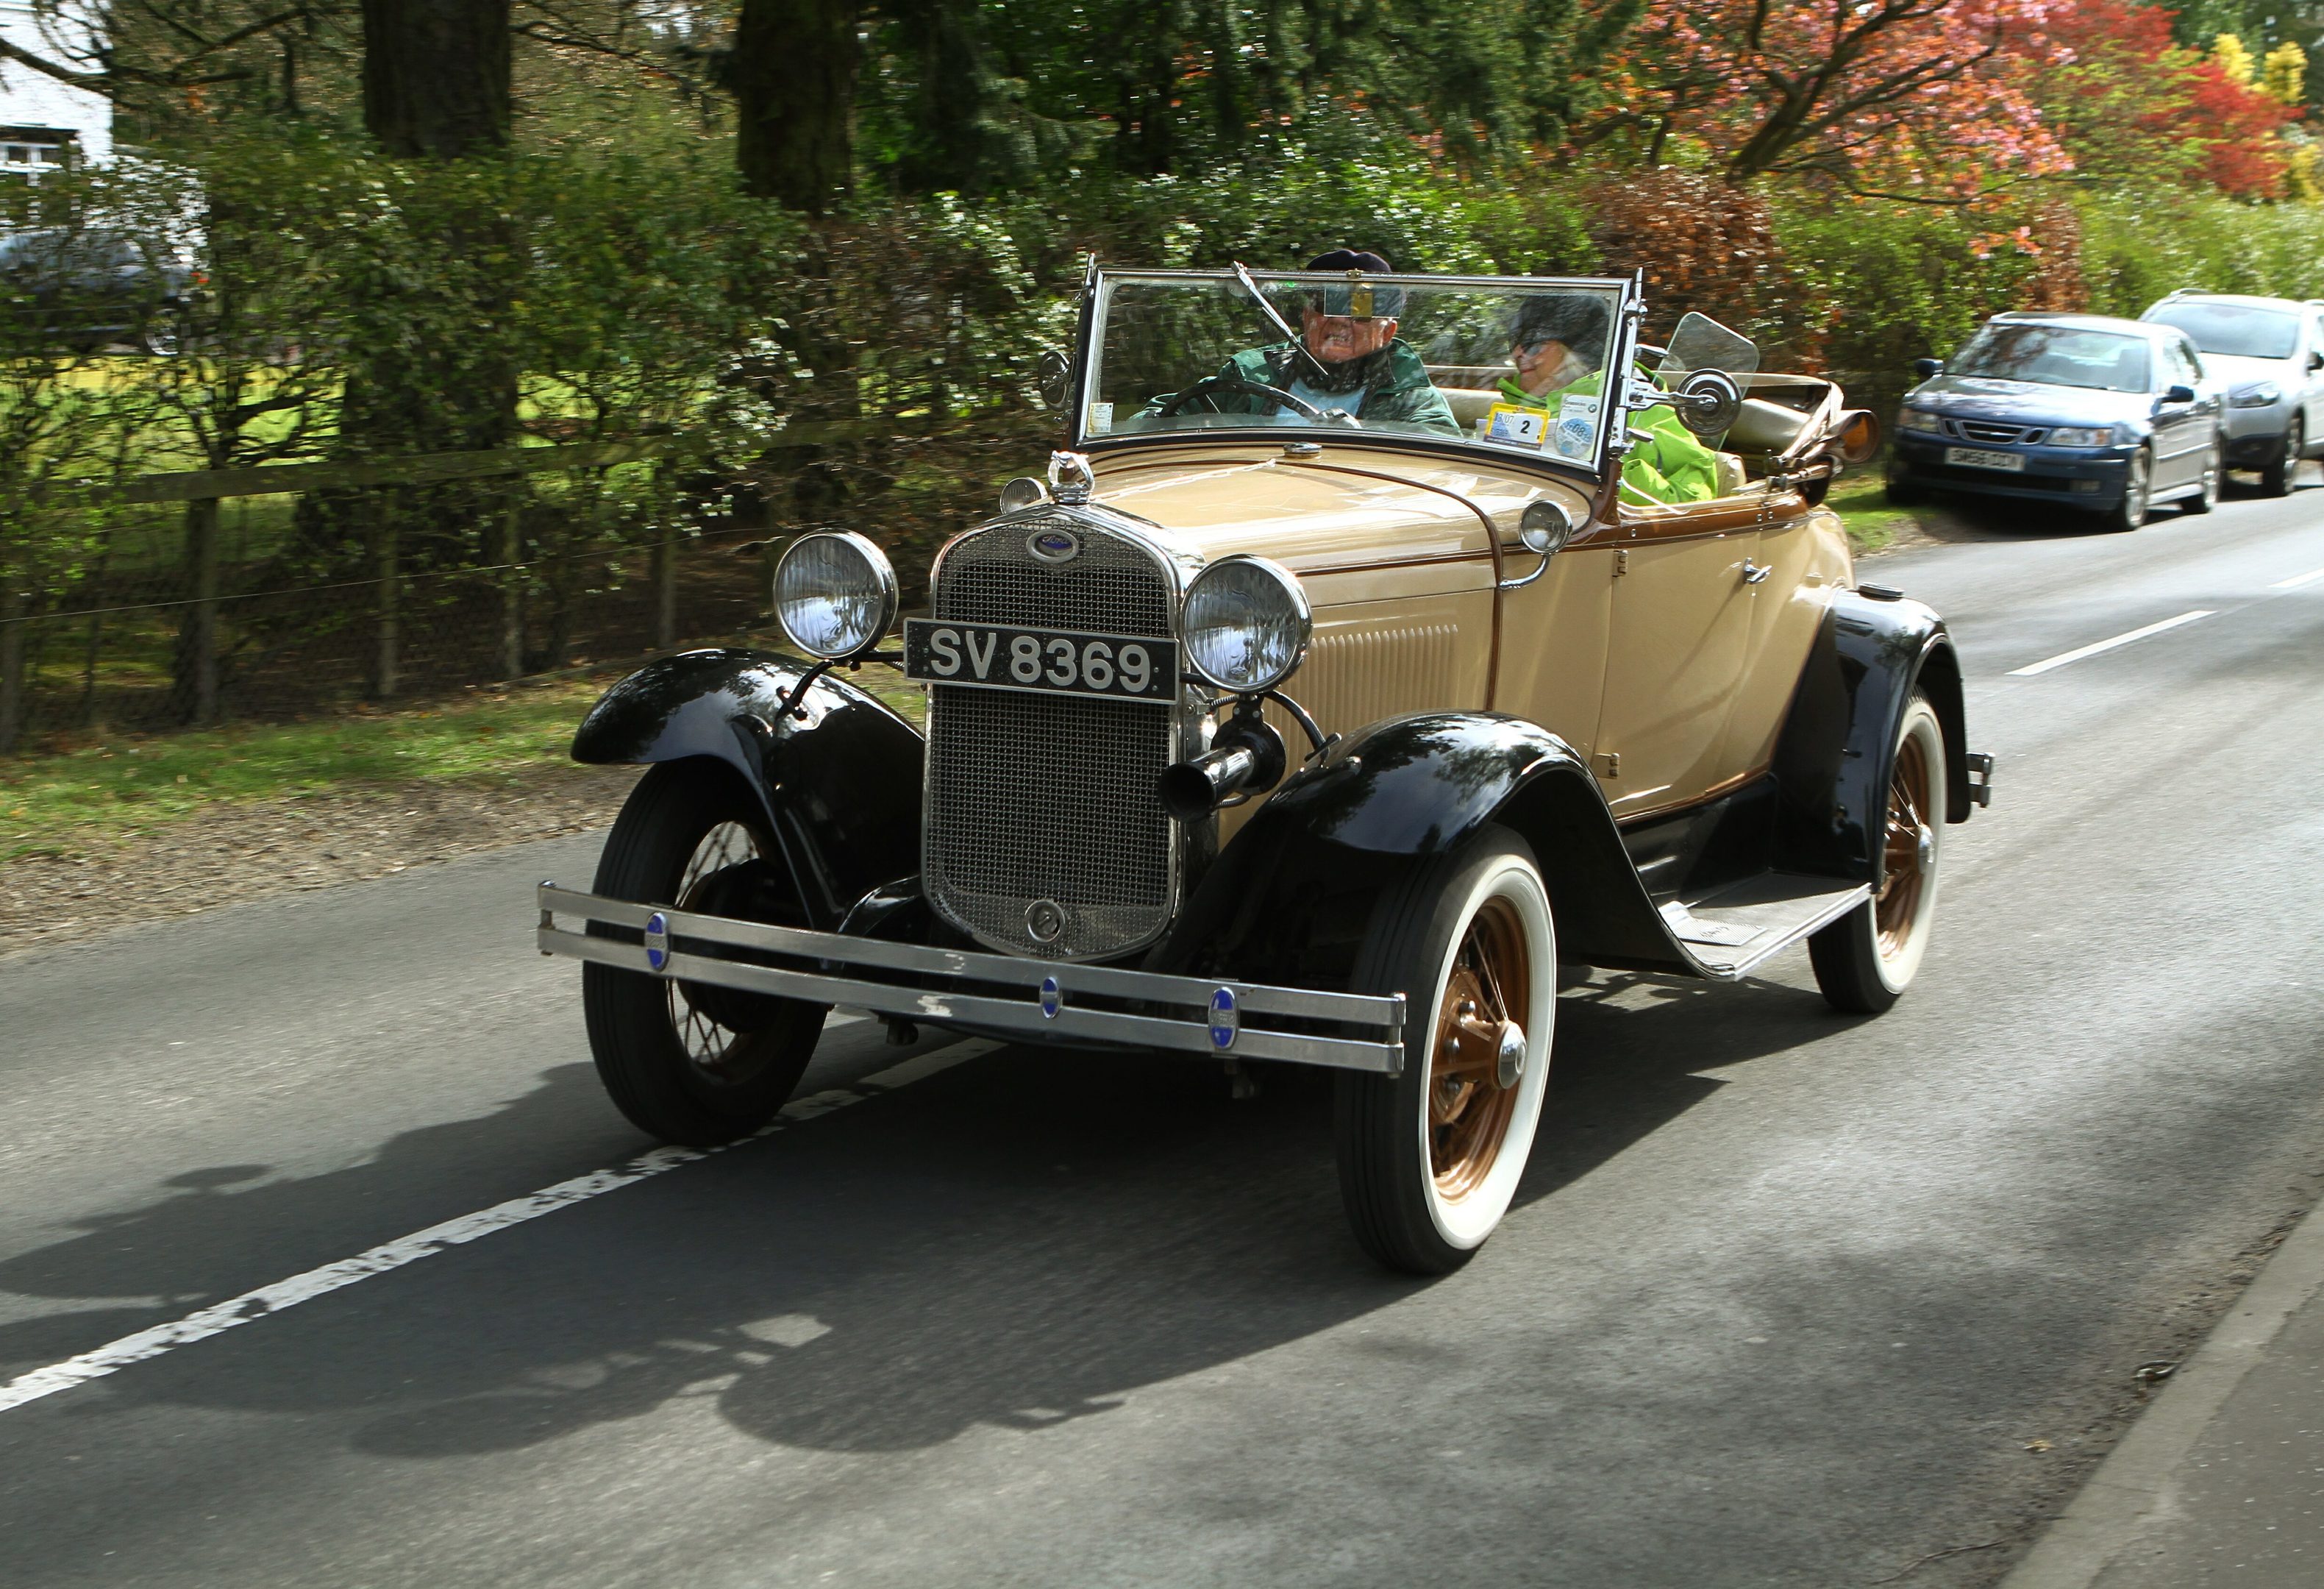 .A class car in last year’s Drive It Day at Blairgowrie.